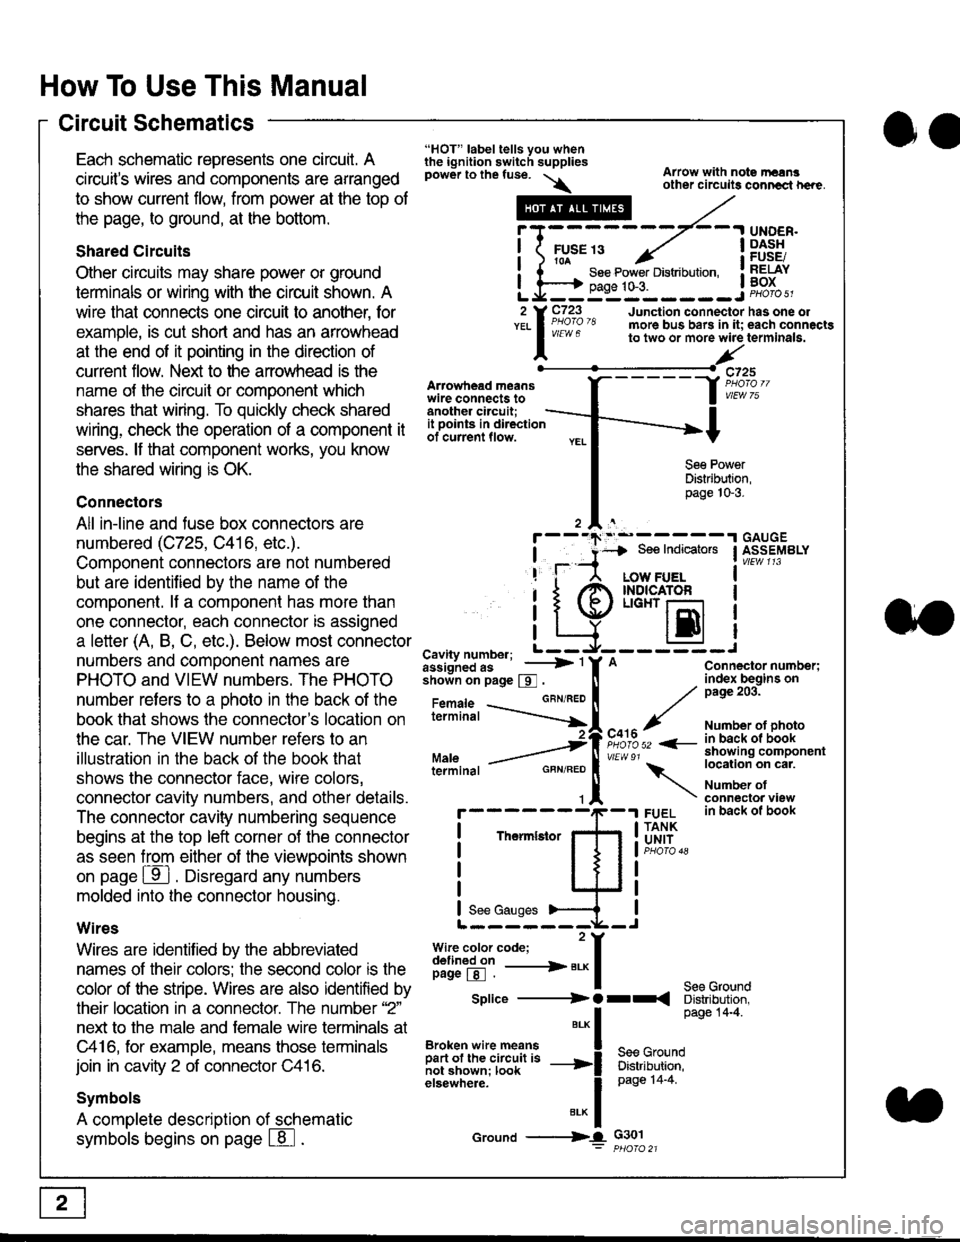 HONDA CIVIC 1996 6.G Owners Guide How To Use This Manual
Circuit Schematics
oa
Each schematic represents one circult. A
circuits wires and components are arranged
to show current flow, from power at the top of
the page, to ground, at